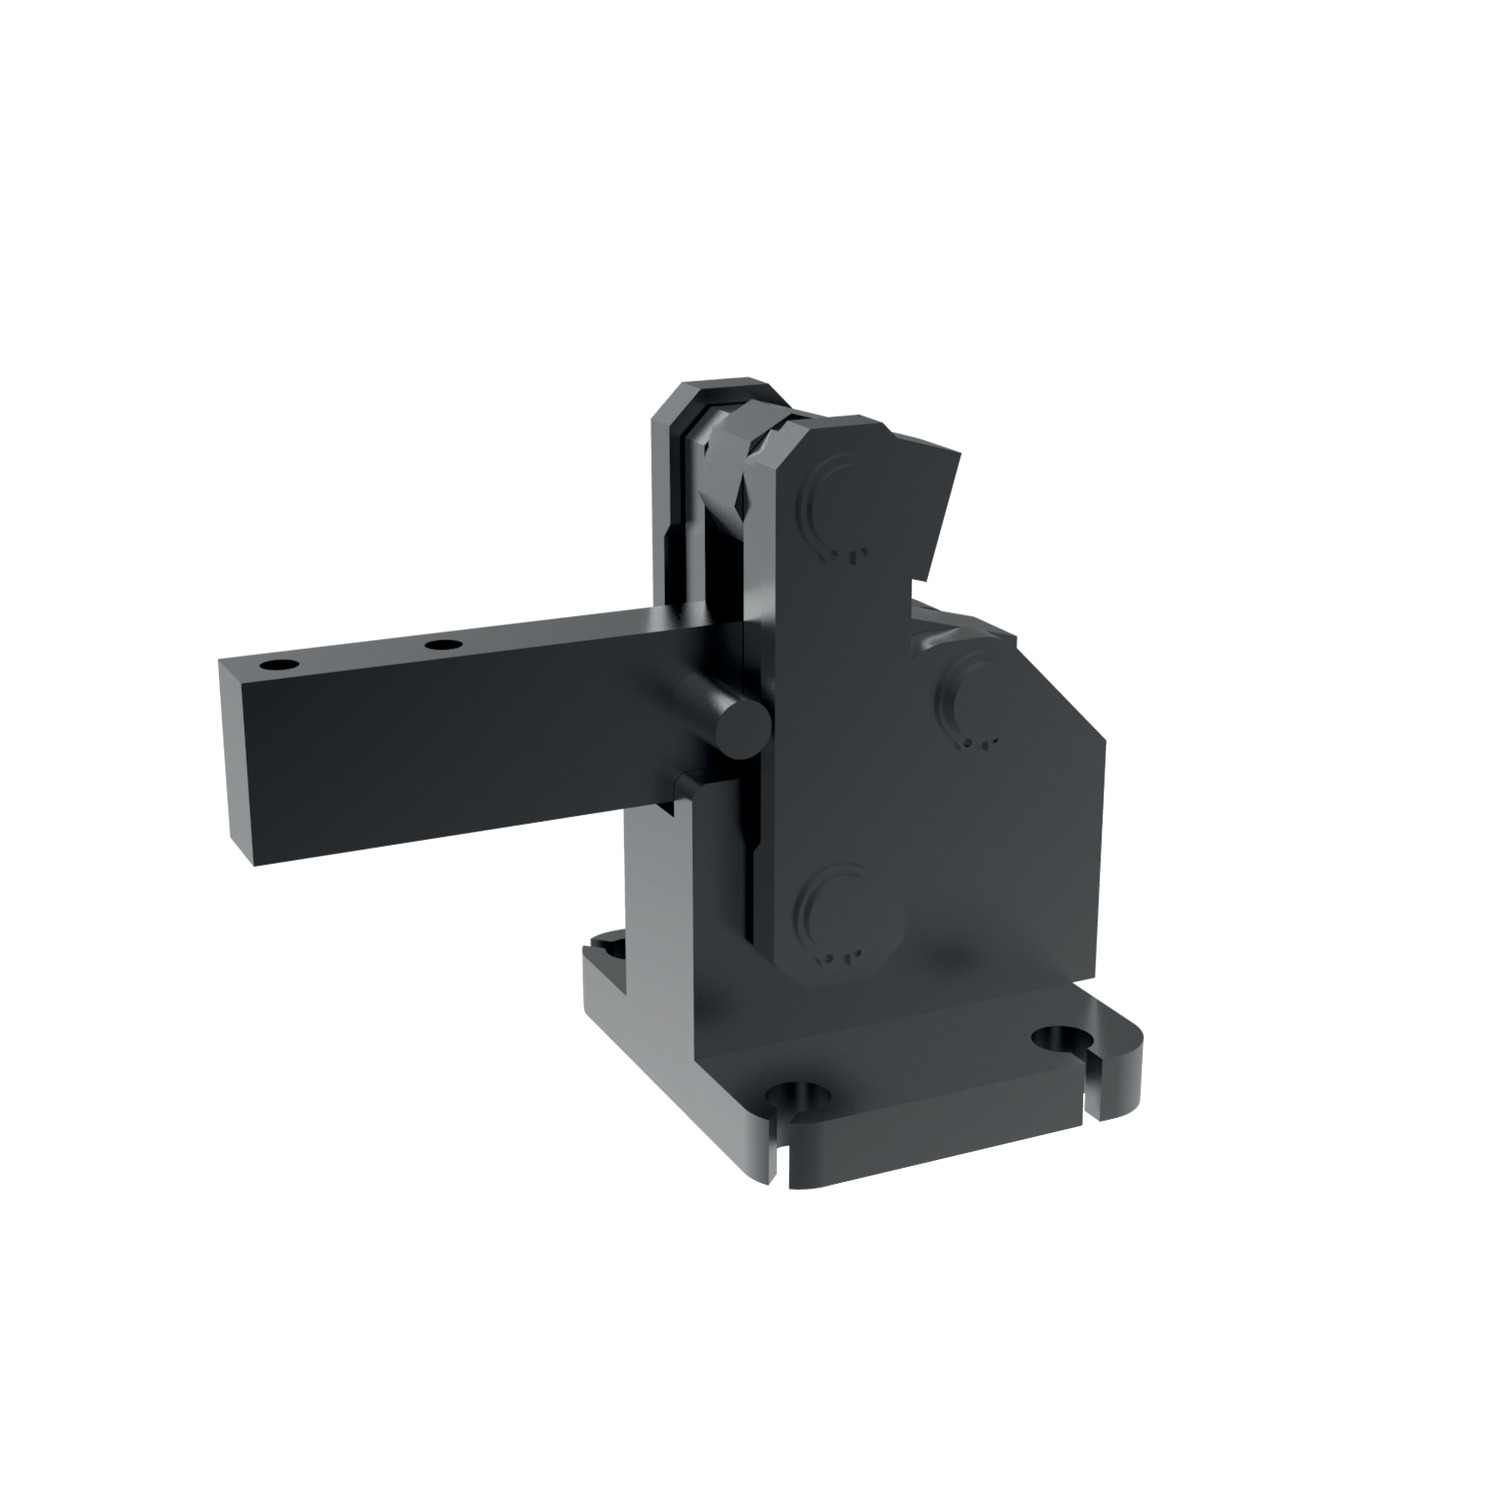 Product 46100, Heavy Duty Vertical Toggle Clamp with vertical base and mounting holes / 